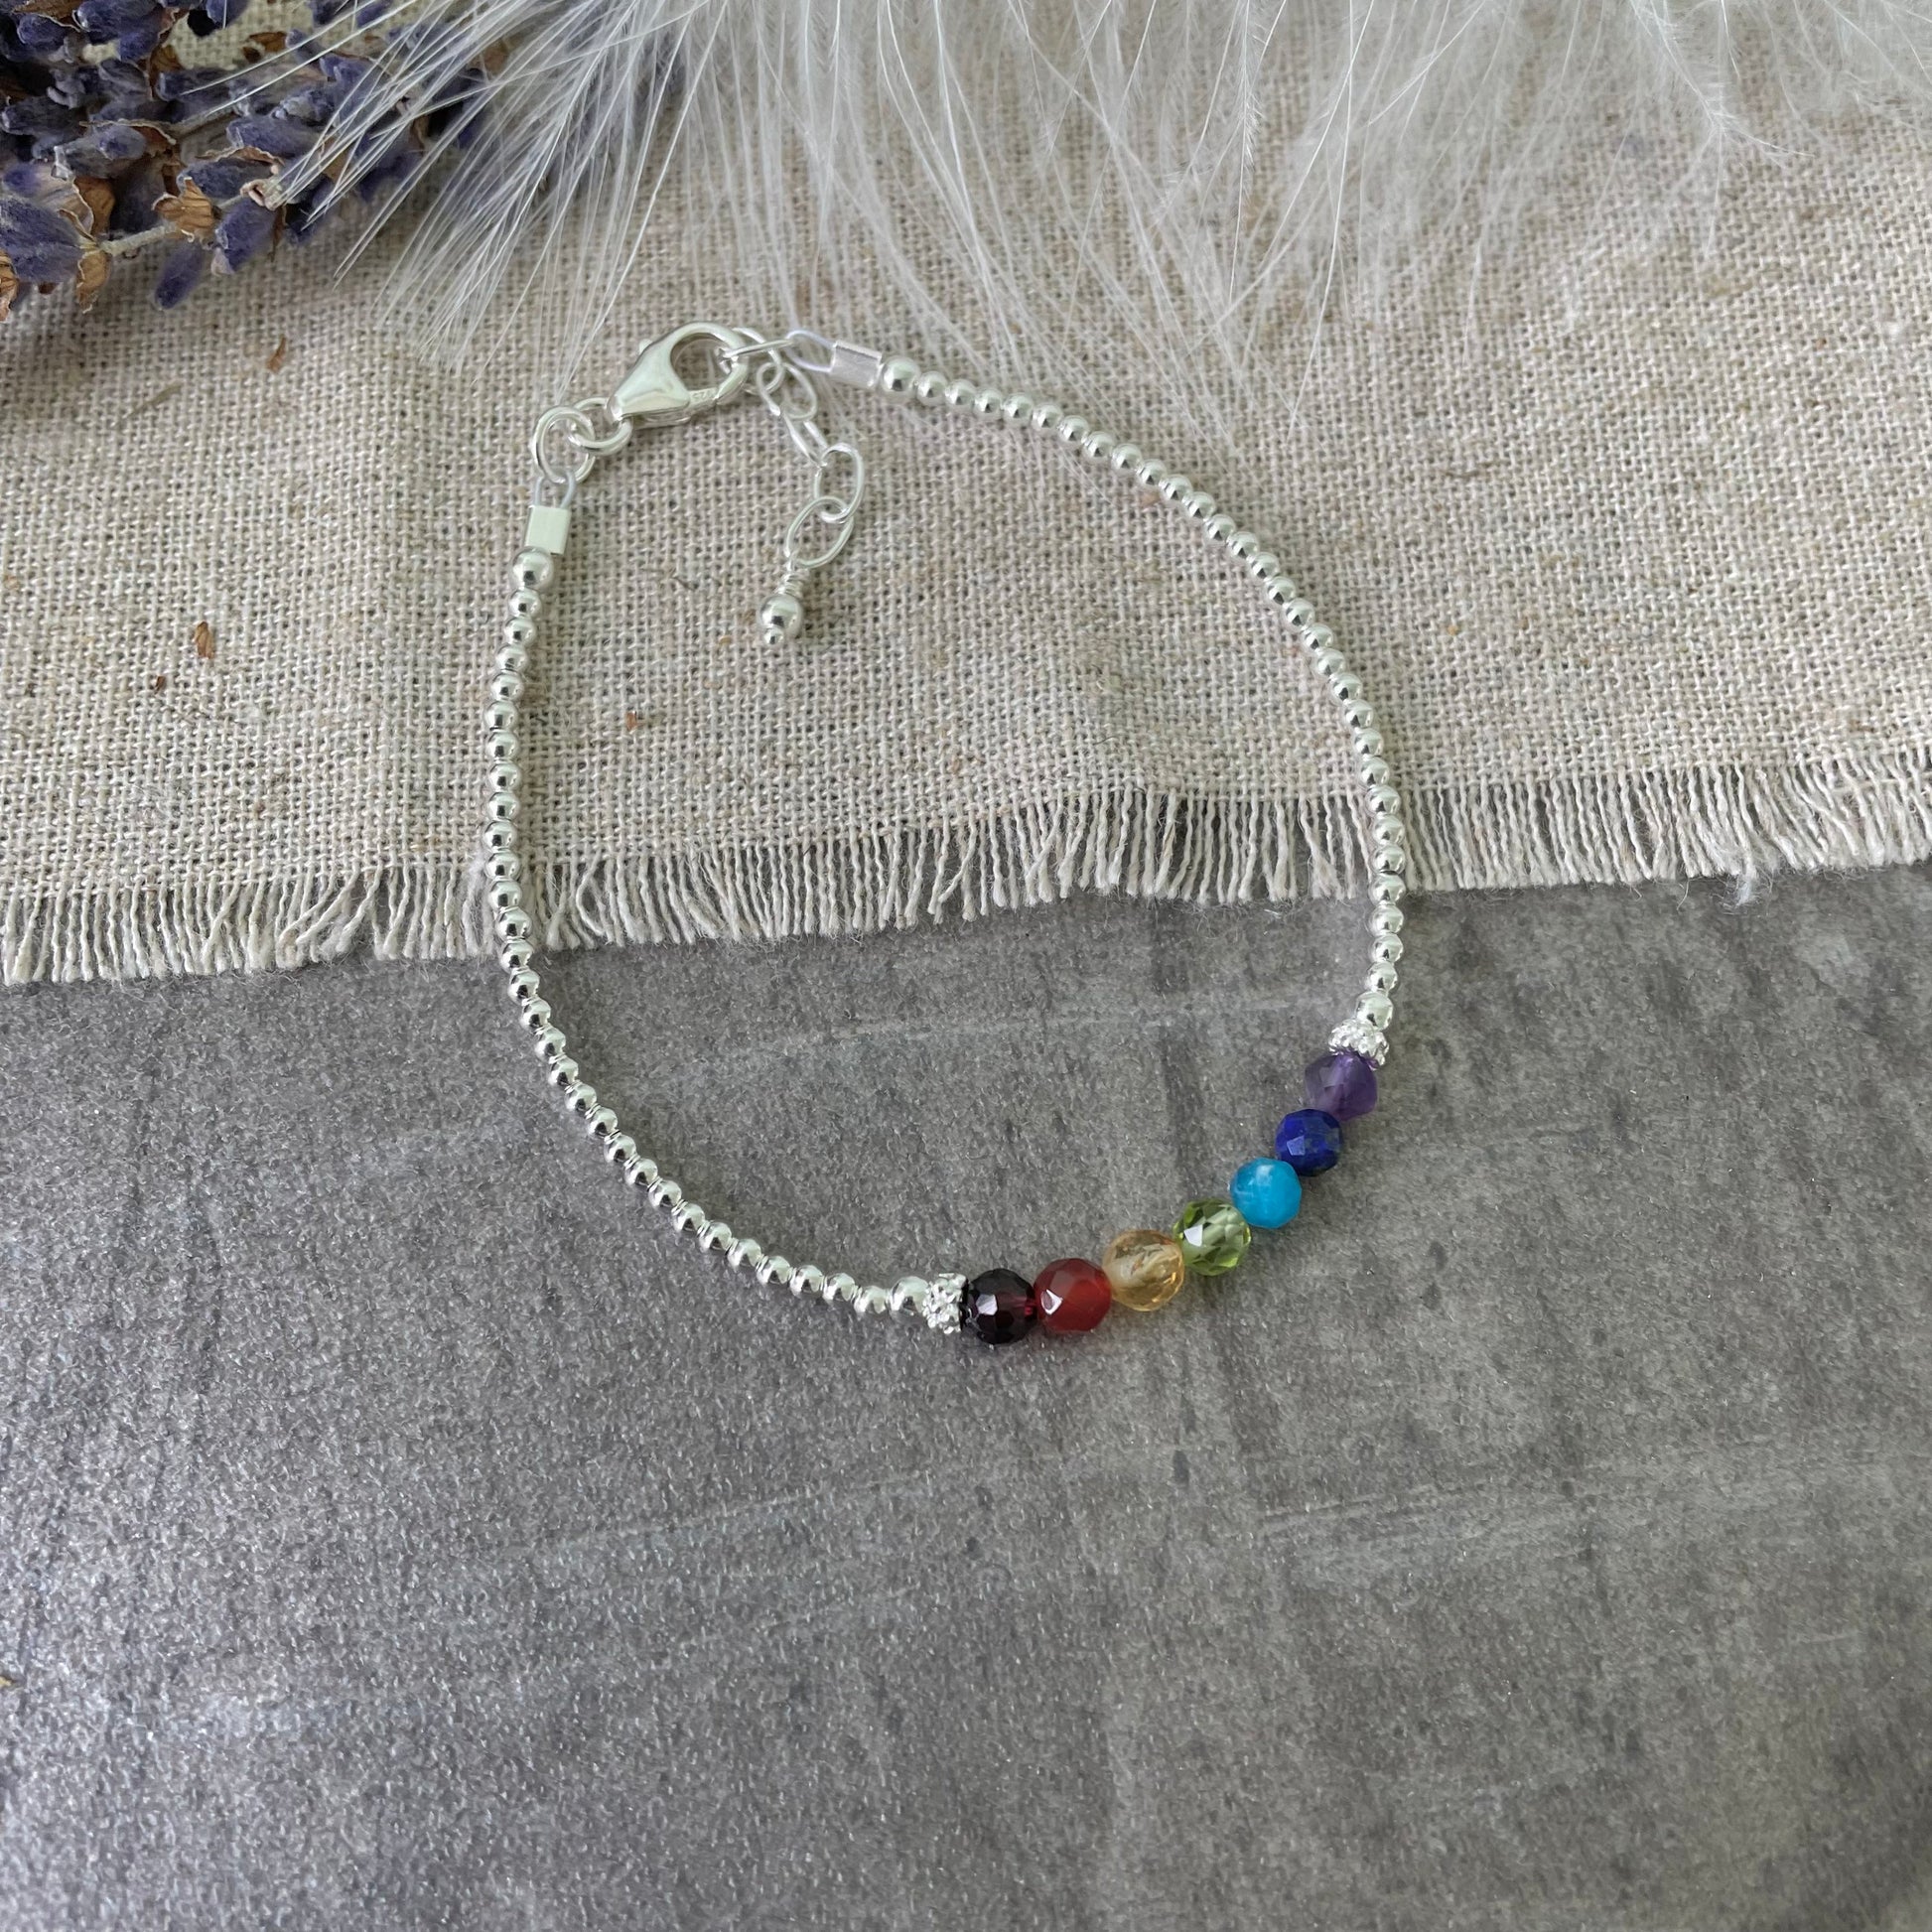 Chakra gemstone bracelet sterling silver with Rainbow Crystals Jewellery Gift for her